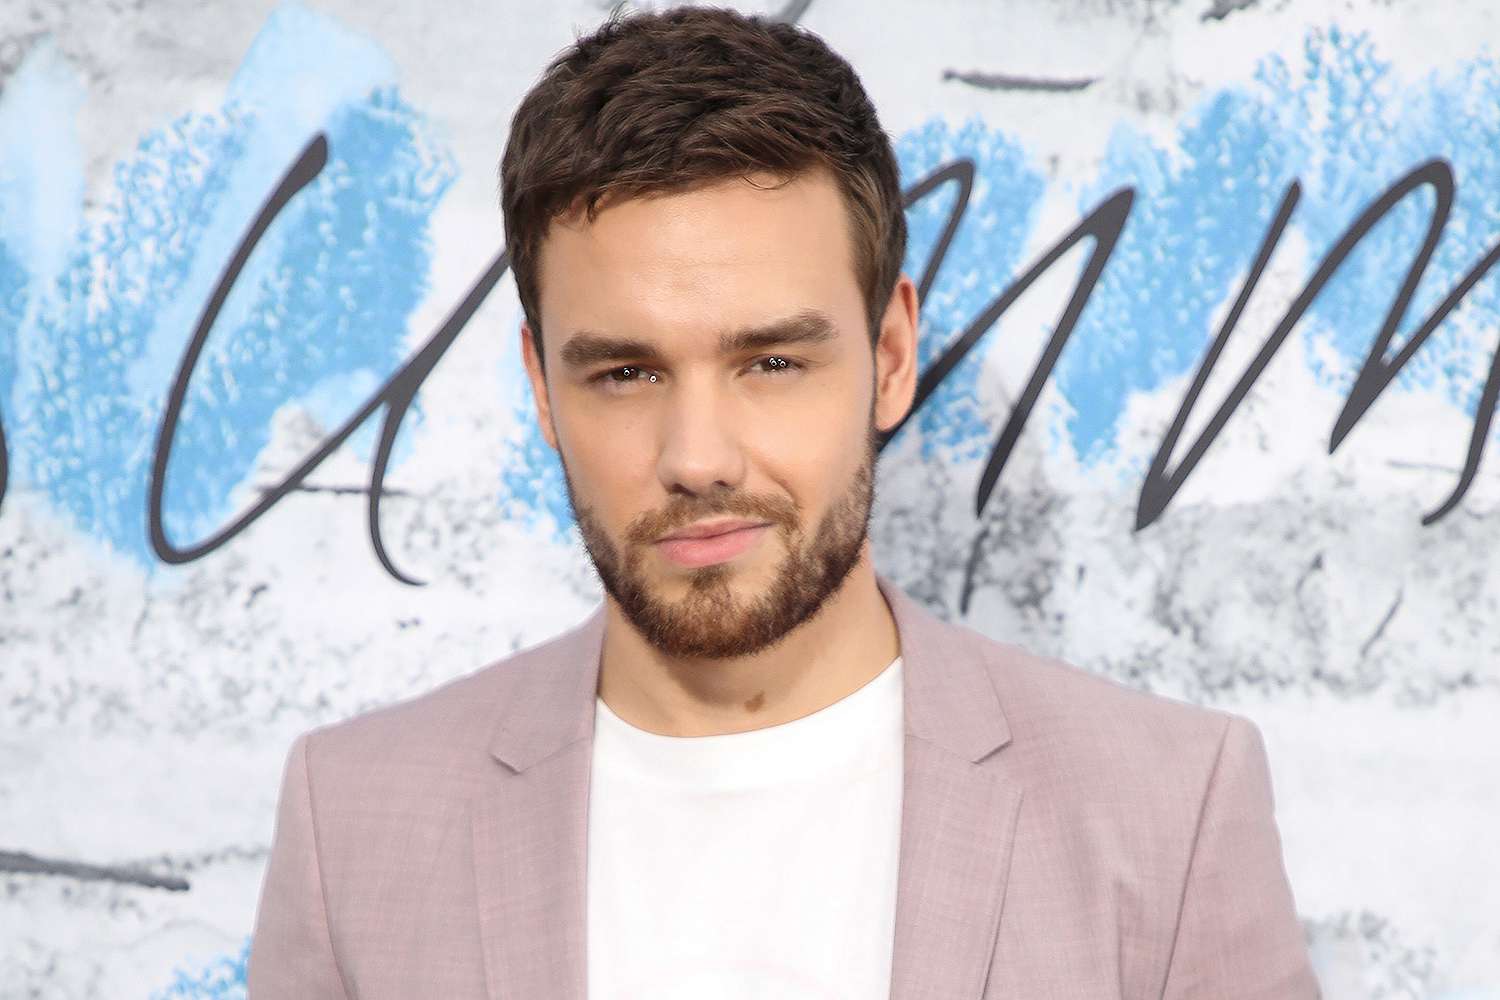 Liam Payne plastic surgery before and after Rumors details